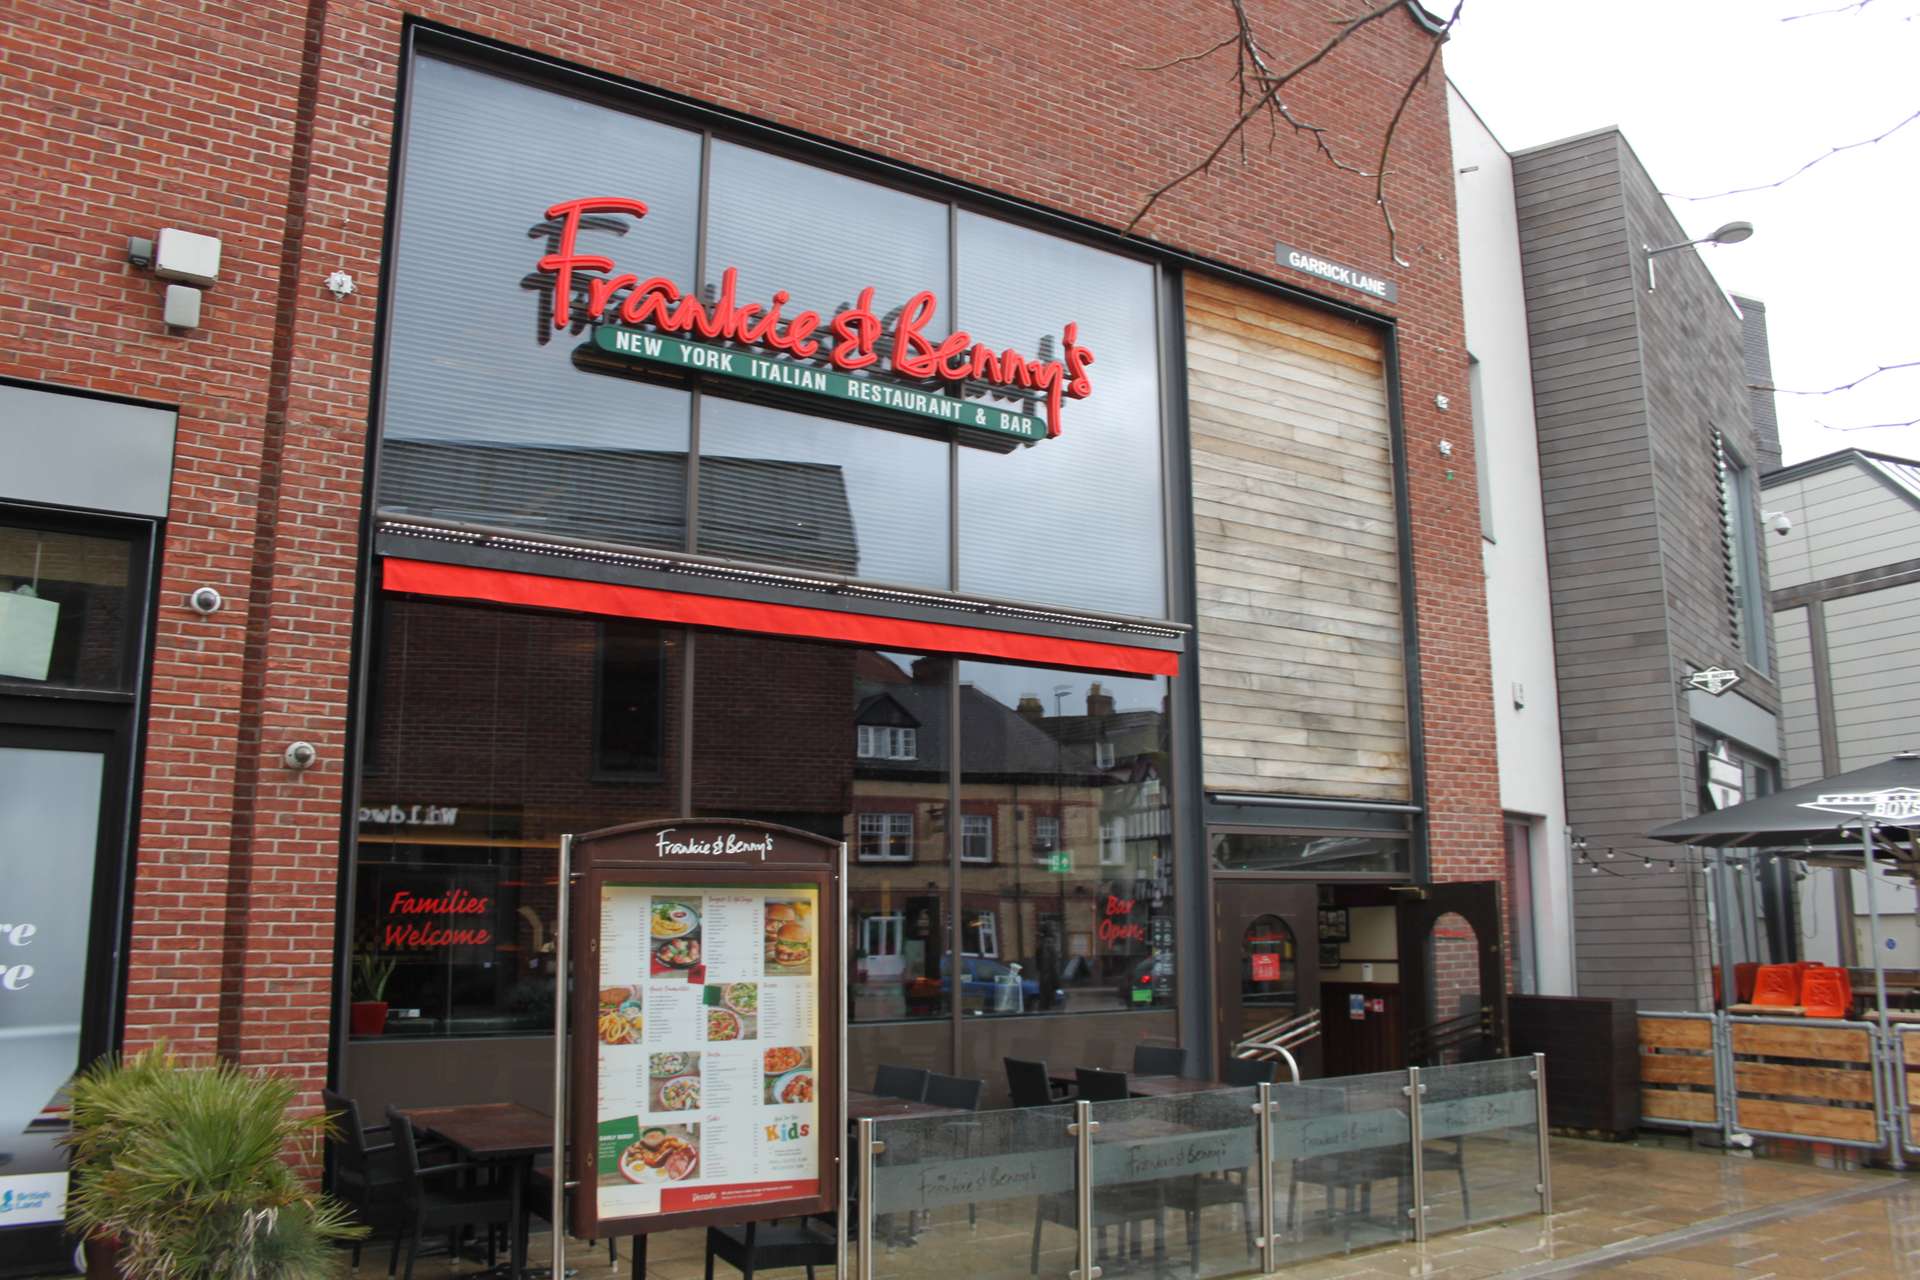 NEWS | Frankie & Benny’s look set to permanently close Hereford restaurant